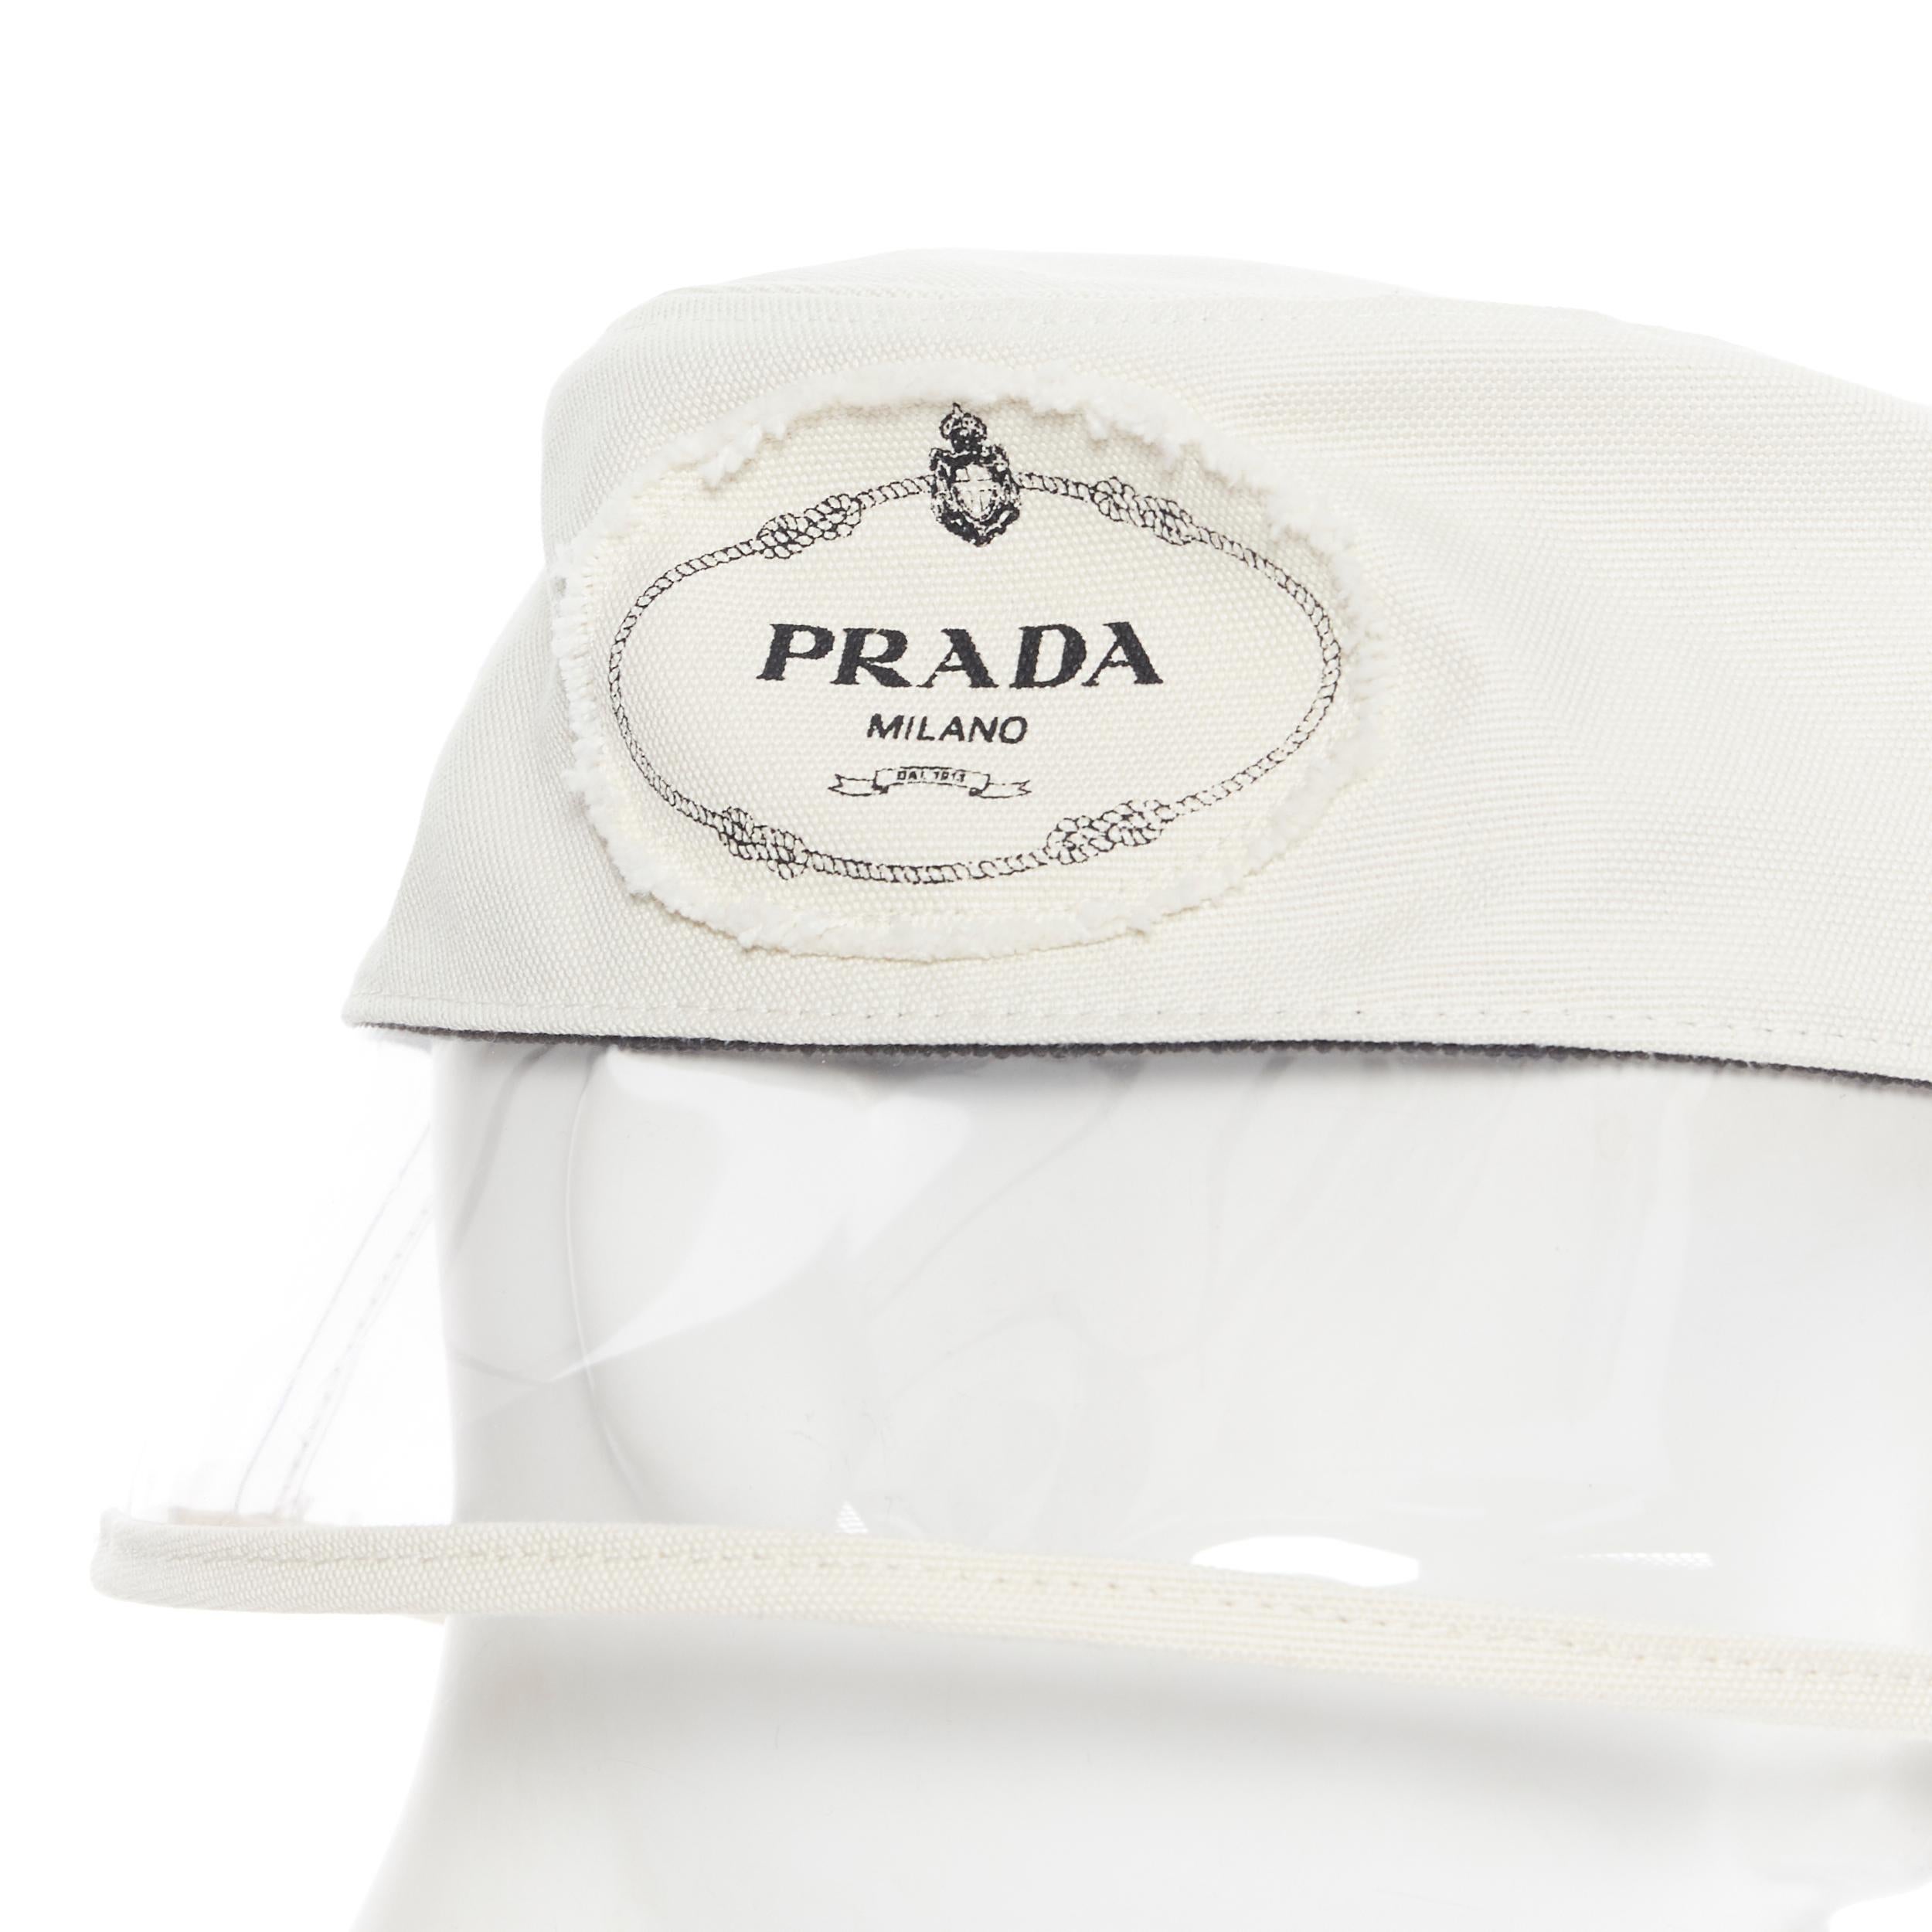 new PRADA 2018 cream cotton frayed logo clear PVC brim shield 90's bucket hat M
Brand: Prada
Designer: Miuccia Prada
Collection: Spring Summer 2018
Model Name / Style: Bucket hat
Material: Cotton, PVC
Color: White
Pattern: Solid
Extra Detail: Very